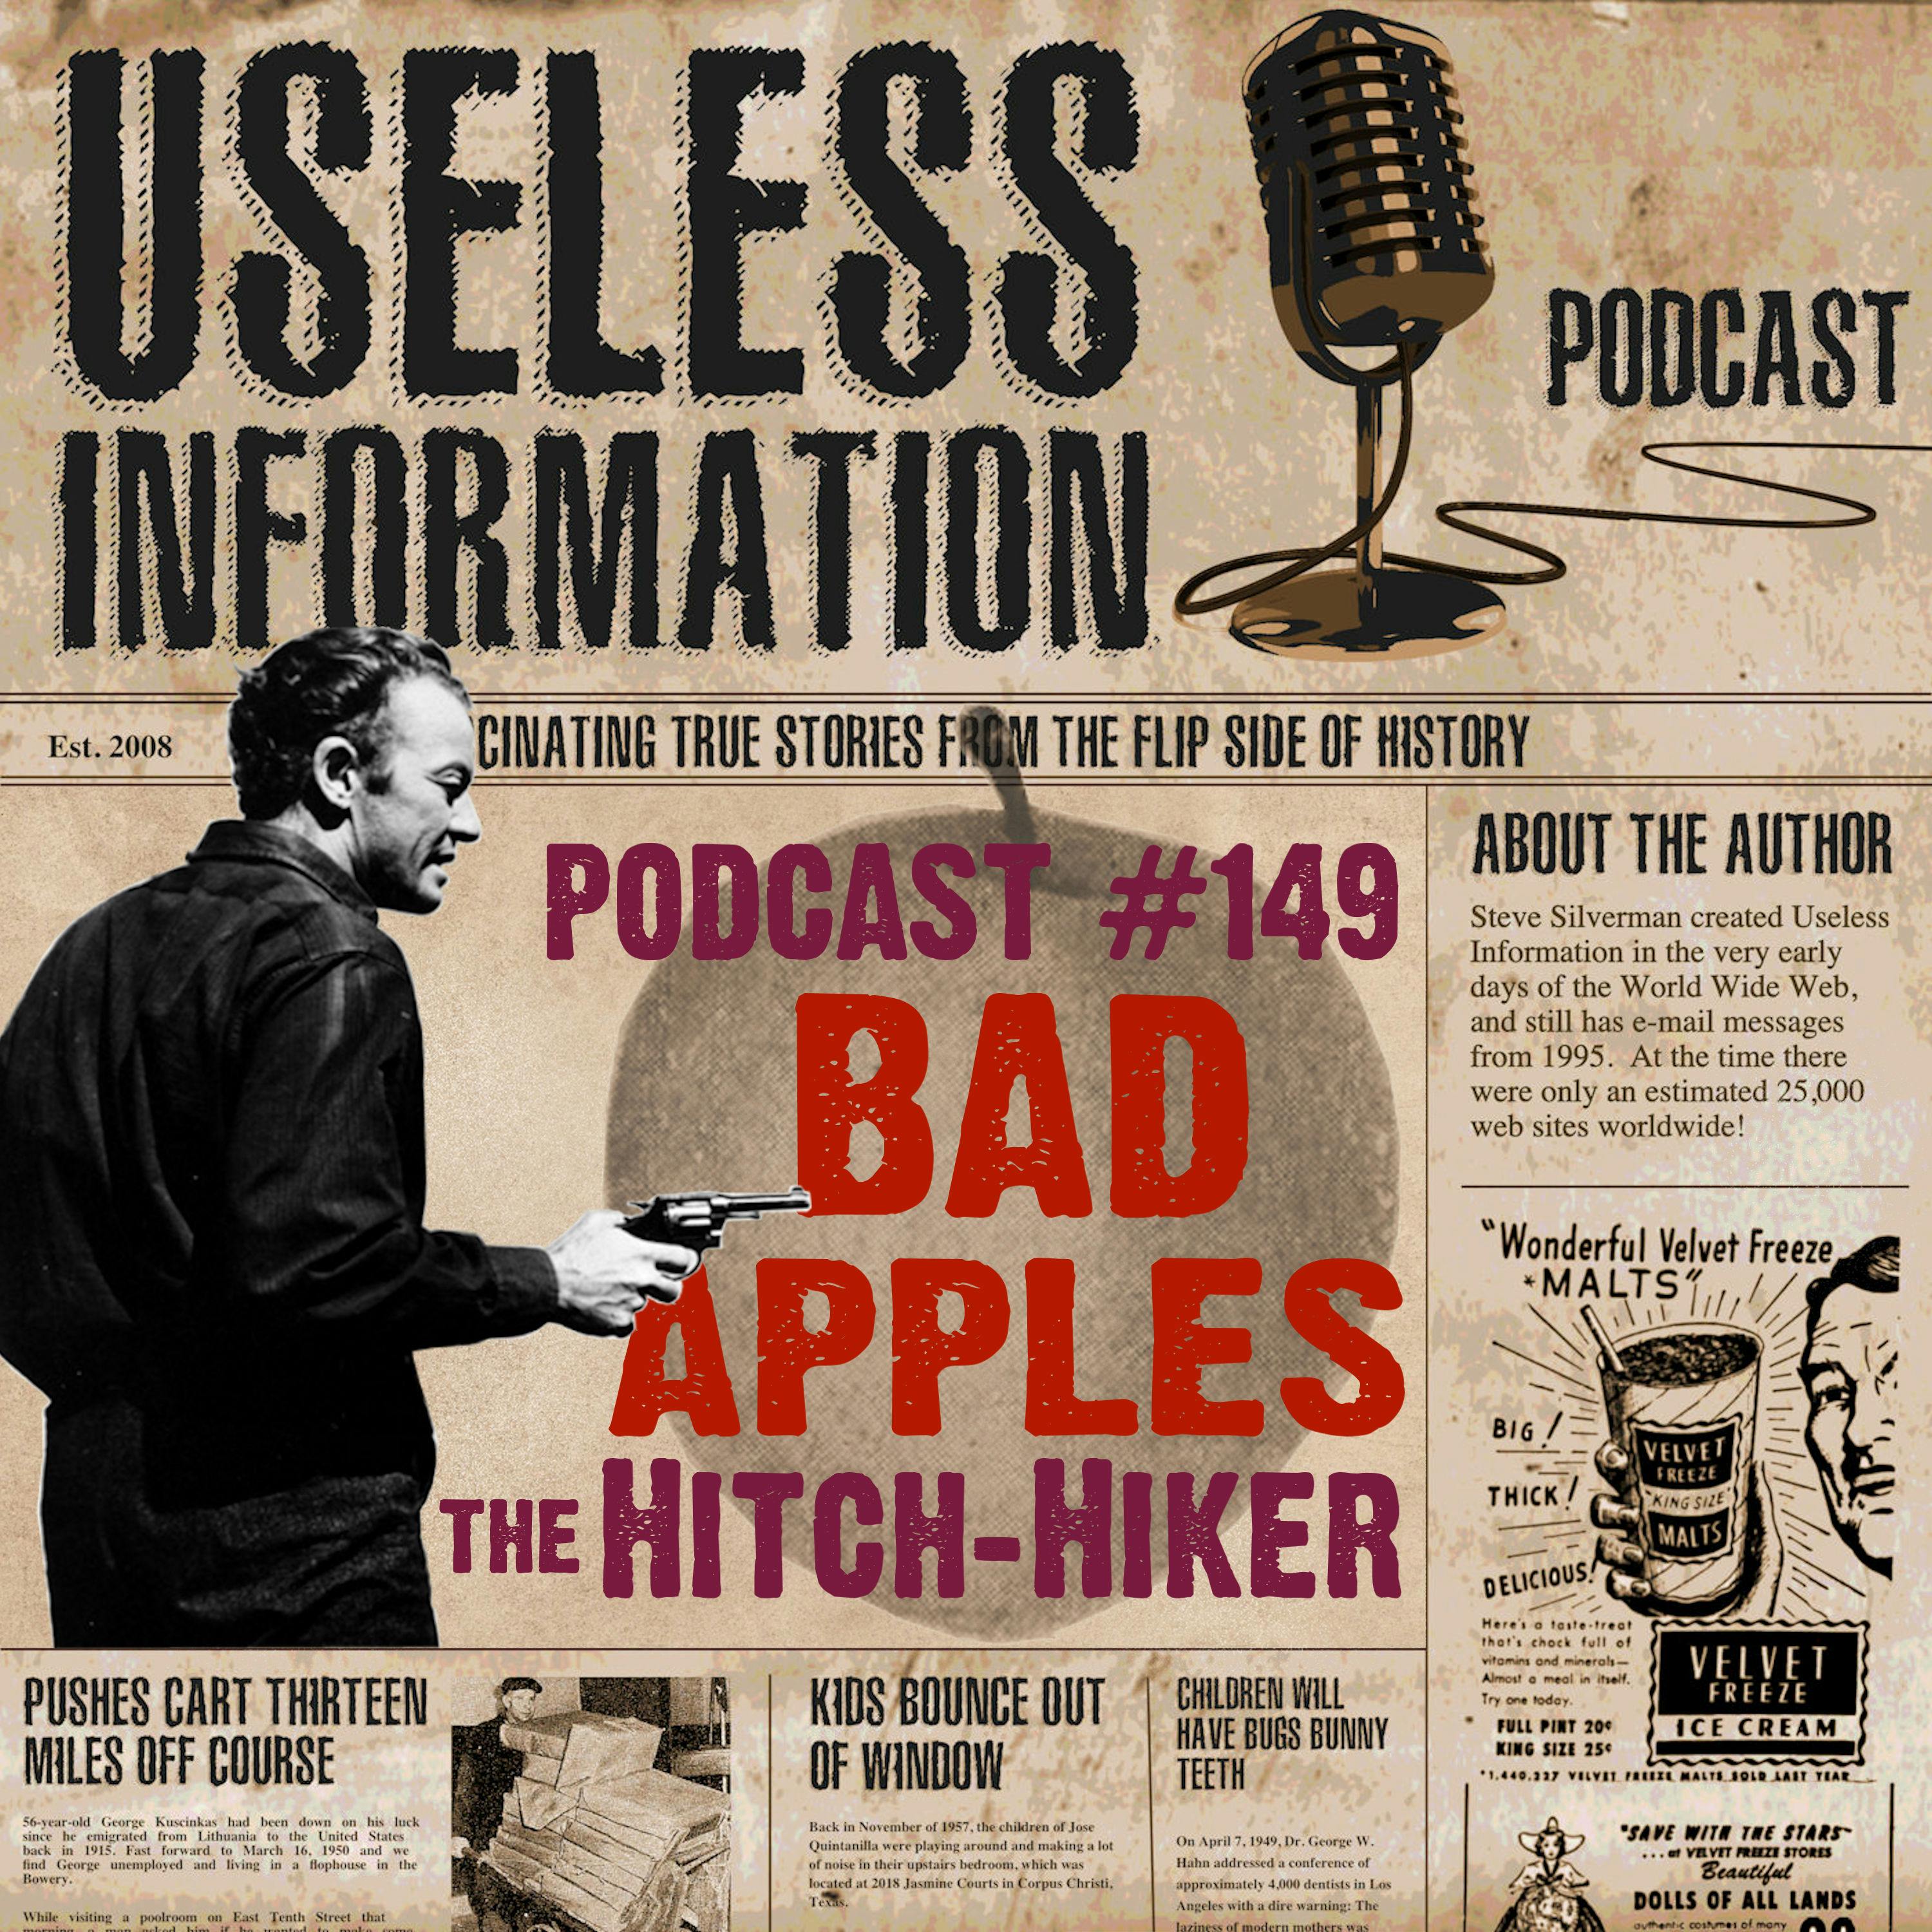 Bad Apples #2 - The Hitch-Hiker - UI Podcast #149